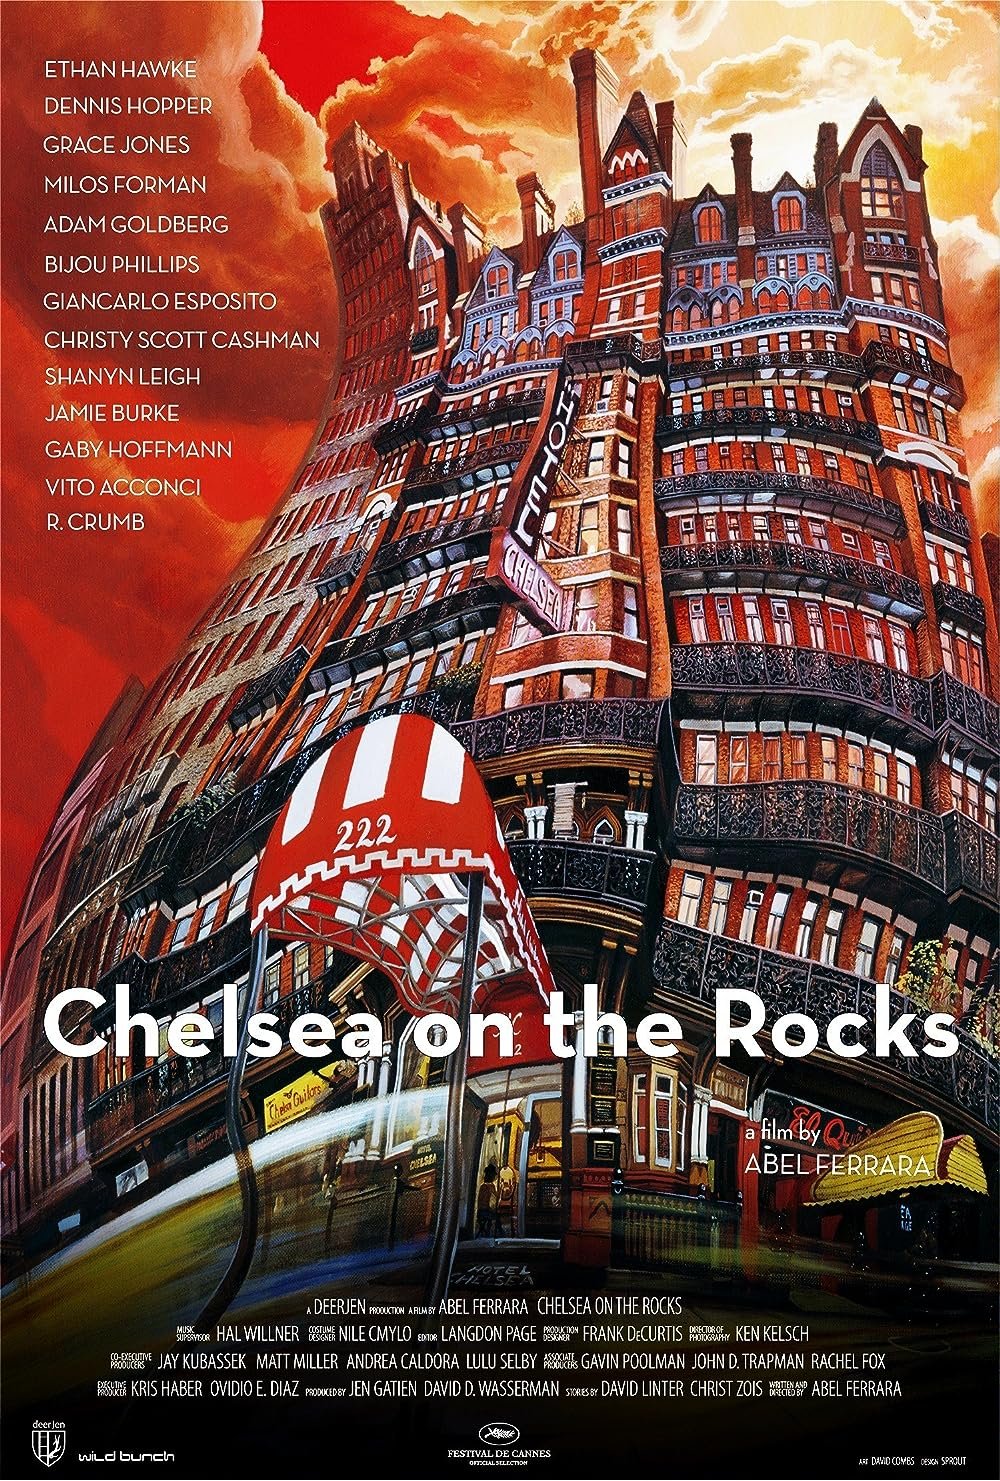 Feature Film Chelsea on the Rocks